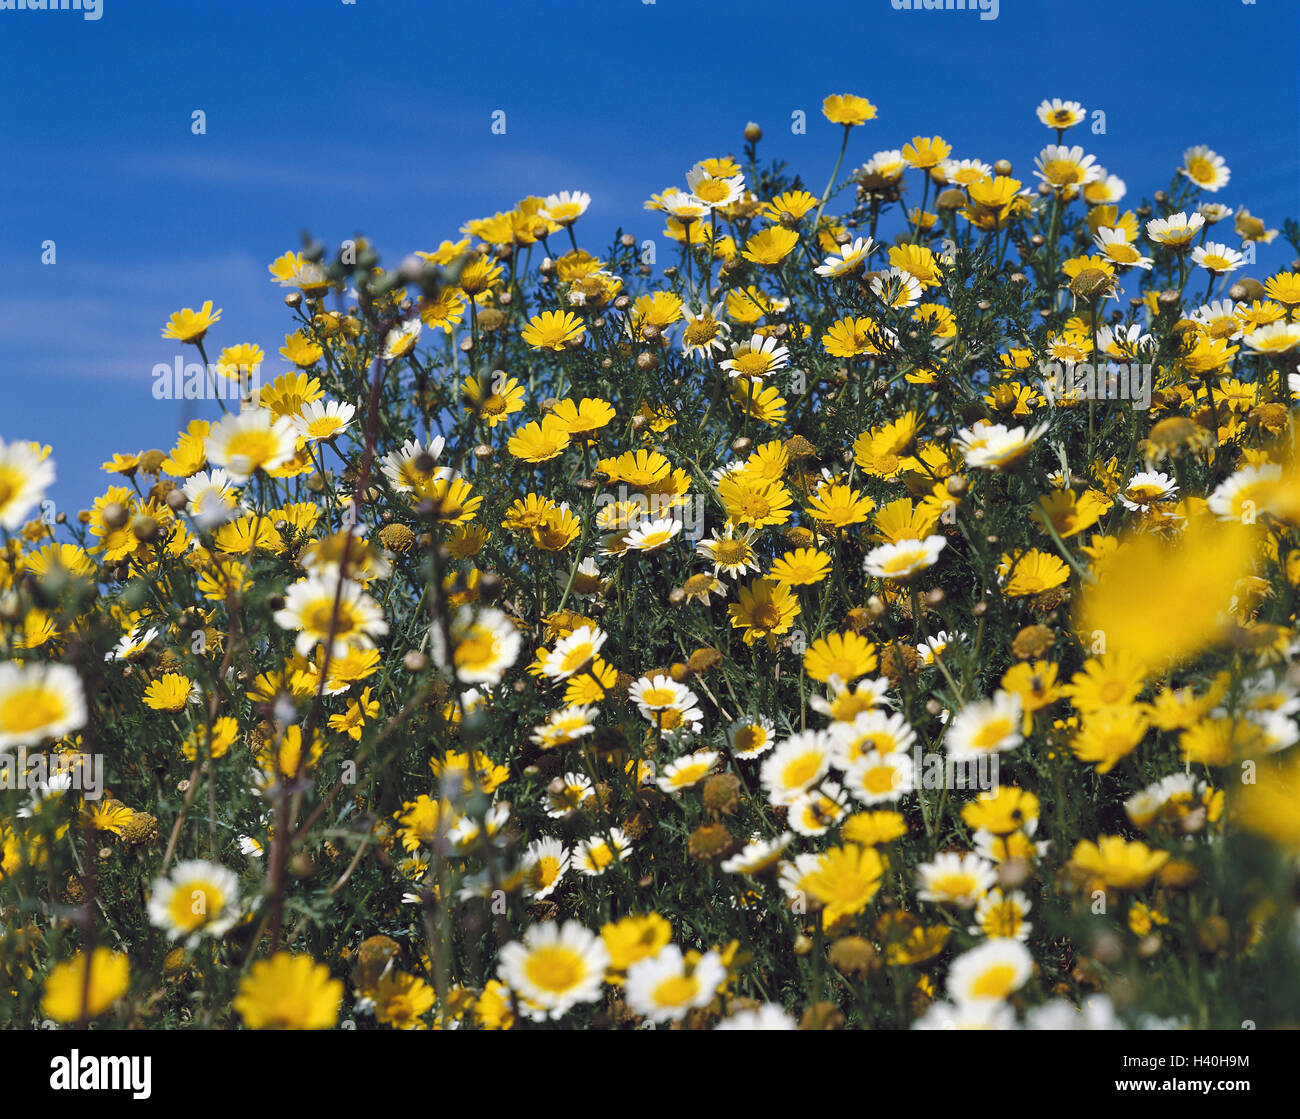 oxeye daisys, blossom, blossoms, differently, detail, nature, botany, vegetation, flora, plant, oxeye daisy blossoms, yellow, white, shrub oxeye daisys, Crysanthemum frutescens, composites, summery, summer flowers Stock Photo